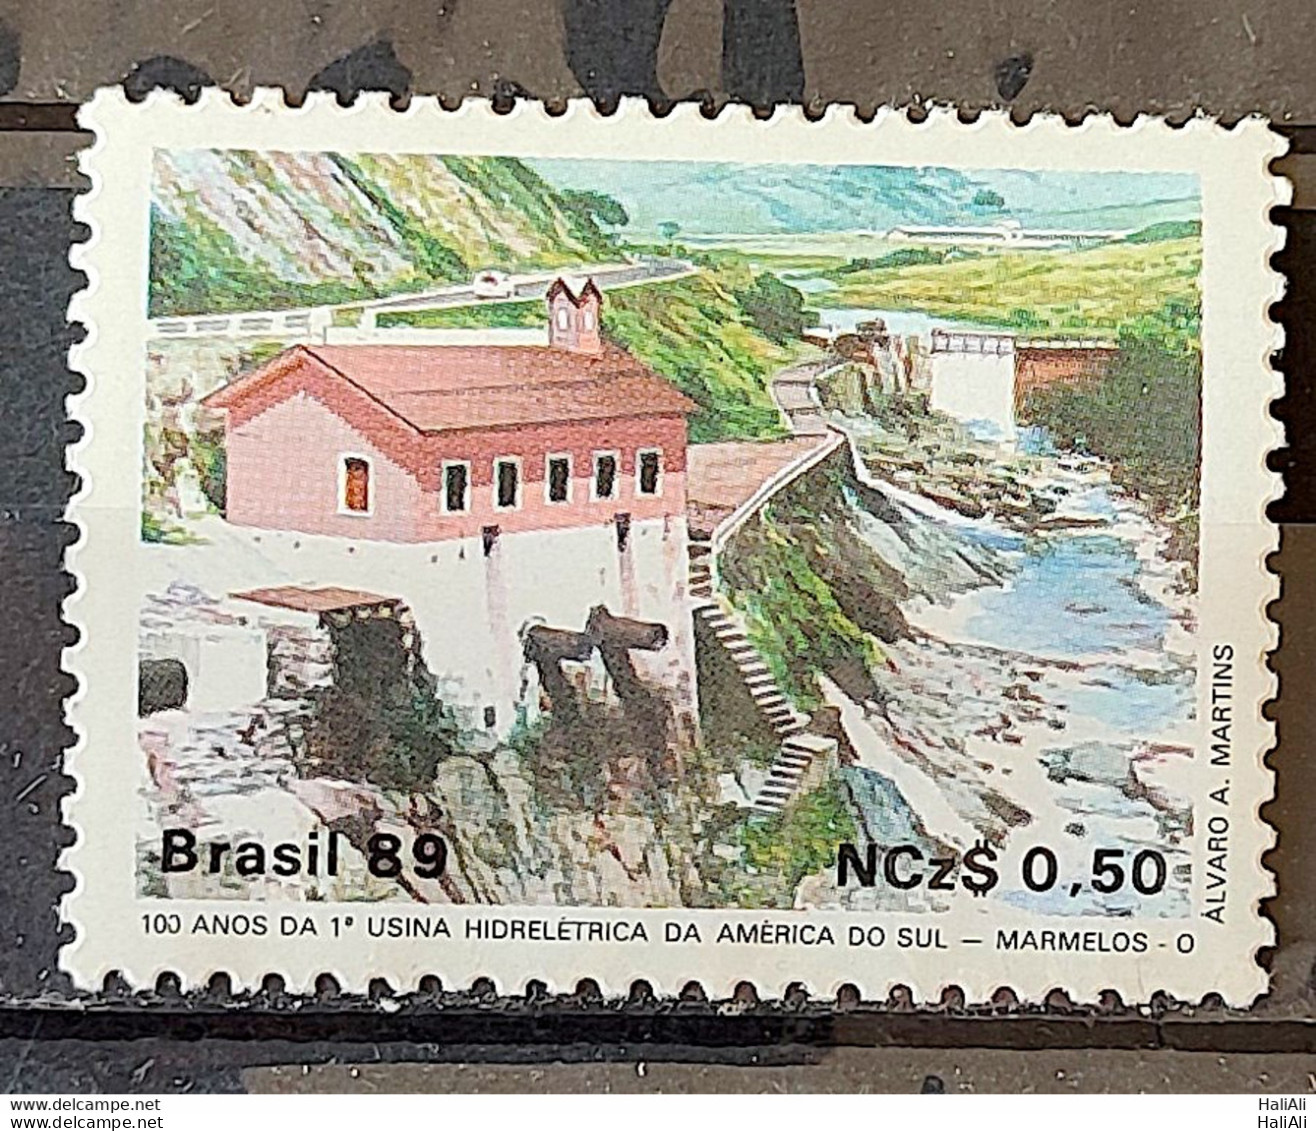 C 1644 Brazil Stamp 100 Years Hydroelectric Marmelos Energy Electricity Juiz De Fora 1989 - Unused Stamps